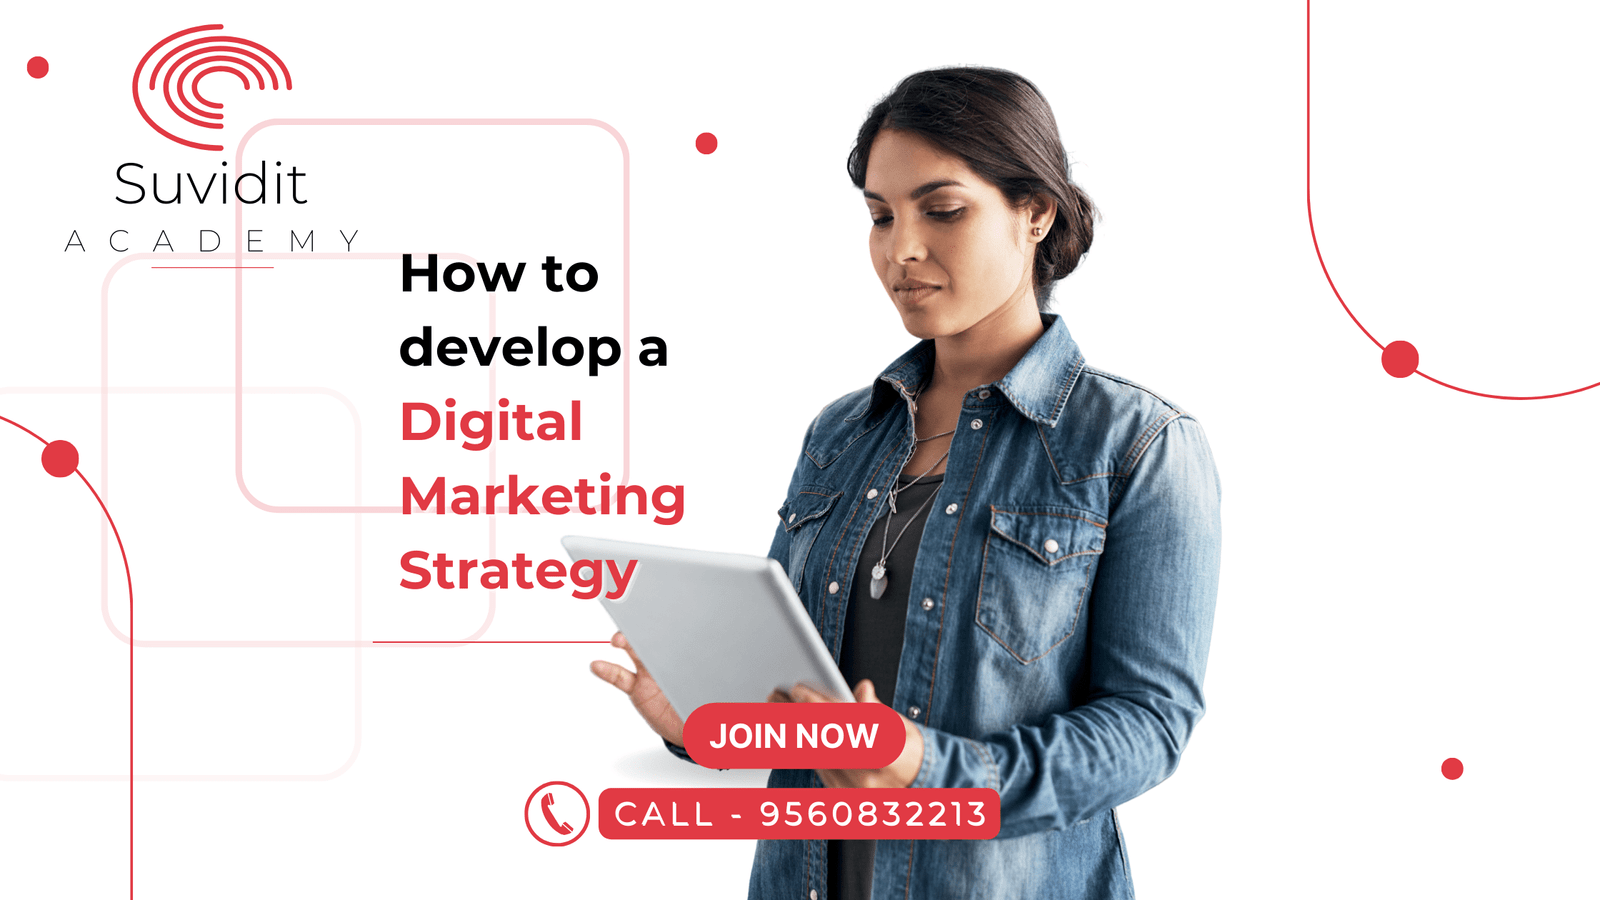 How to develop a Digital Marketing Strategy